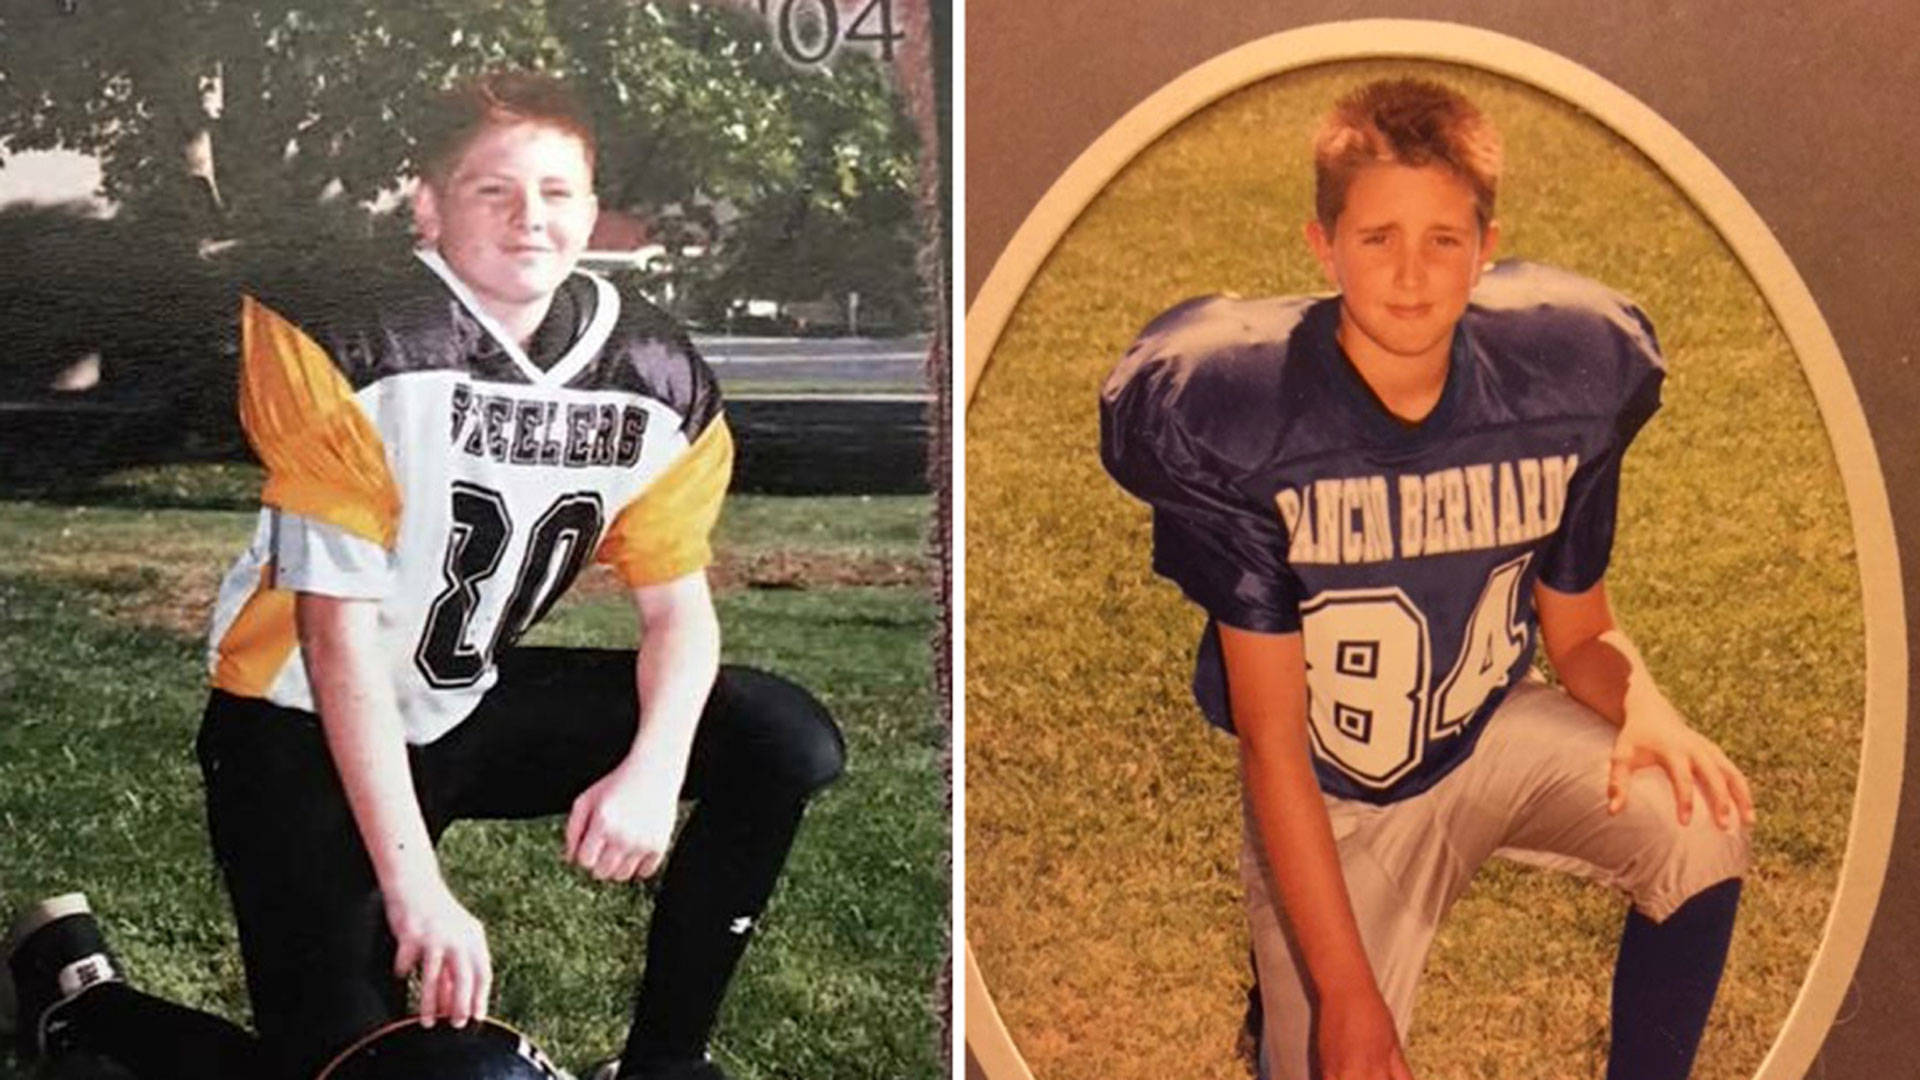 The mothers of Paul Bright Jr. (L) and Tyler Cornell (R) believe their sons' CTE comes from years playing Pop Warner football. Courtesy of the Bright and Cornell families